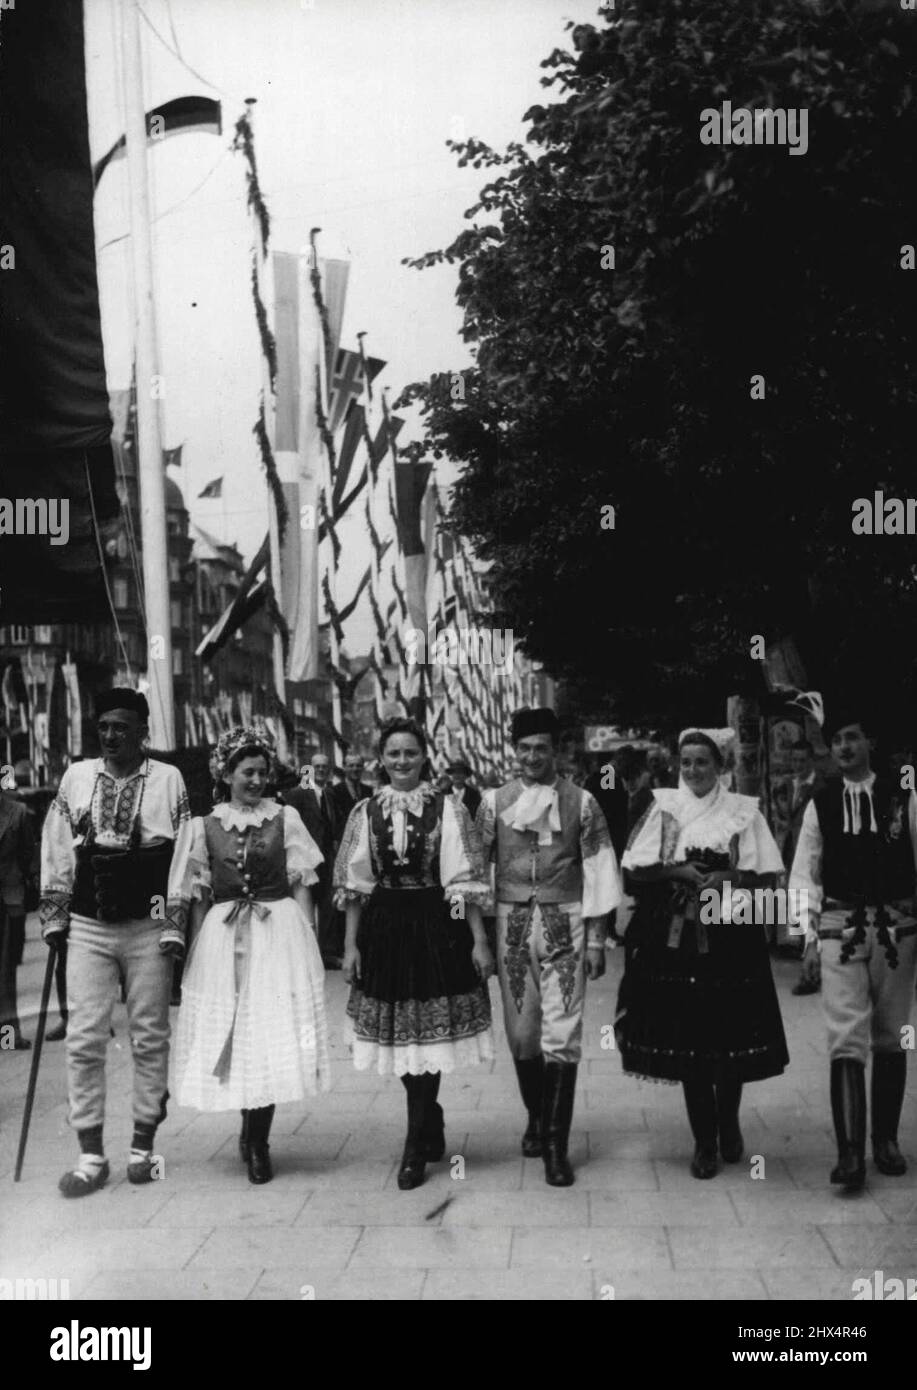 5th Reich Congress 'Strength through Joy' in Hamburg.    On July 20 the 5tE Reich Congress of the NS-recreative movement 'Strength through Joy' was opened in Hamburg by the Reich Organizing Director of the NSDAP Dr. Ley. Representatives of 21 nations took part in this Congress. Slovaks in their many-coloured national costumes are taking a stroll in the streets of Hamburg. July 9, 1947. Stock Photo